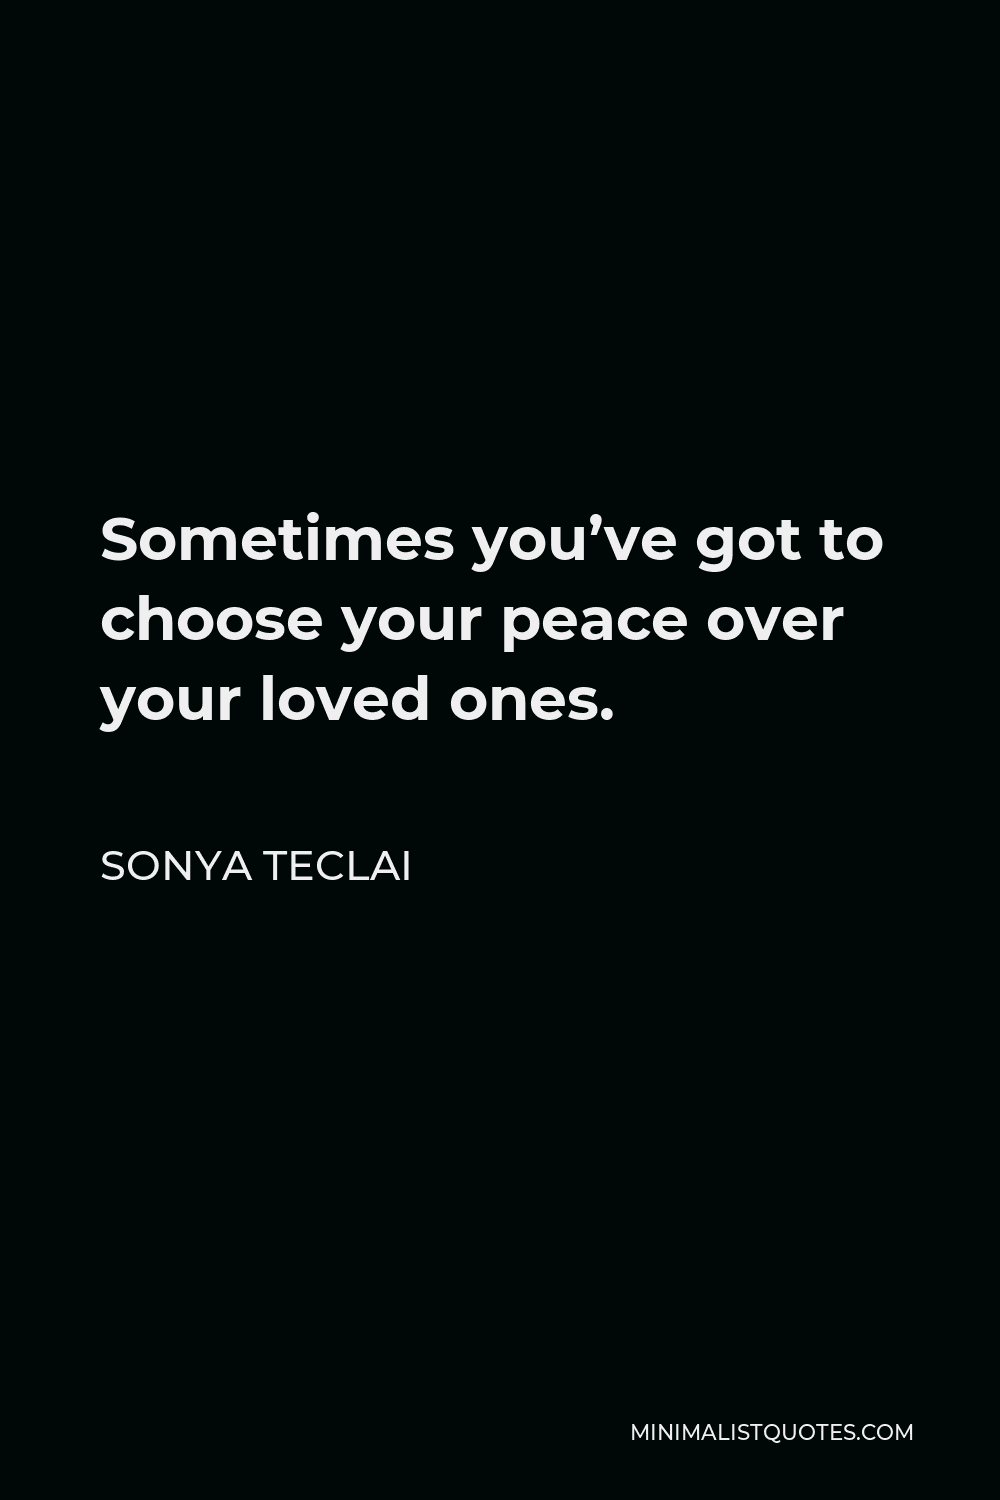 Sonya Teclai Quote - Sometimes you’ve got to choose your peace over your loved ones.